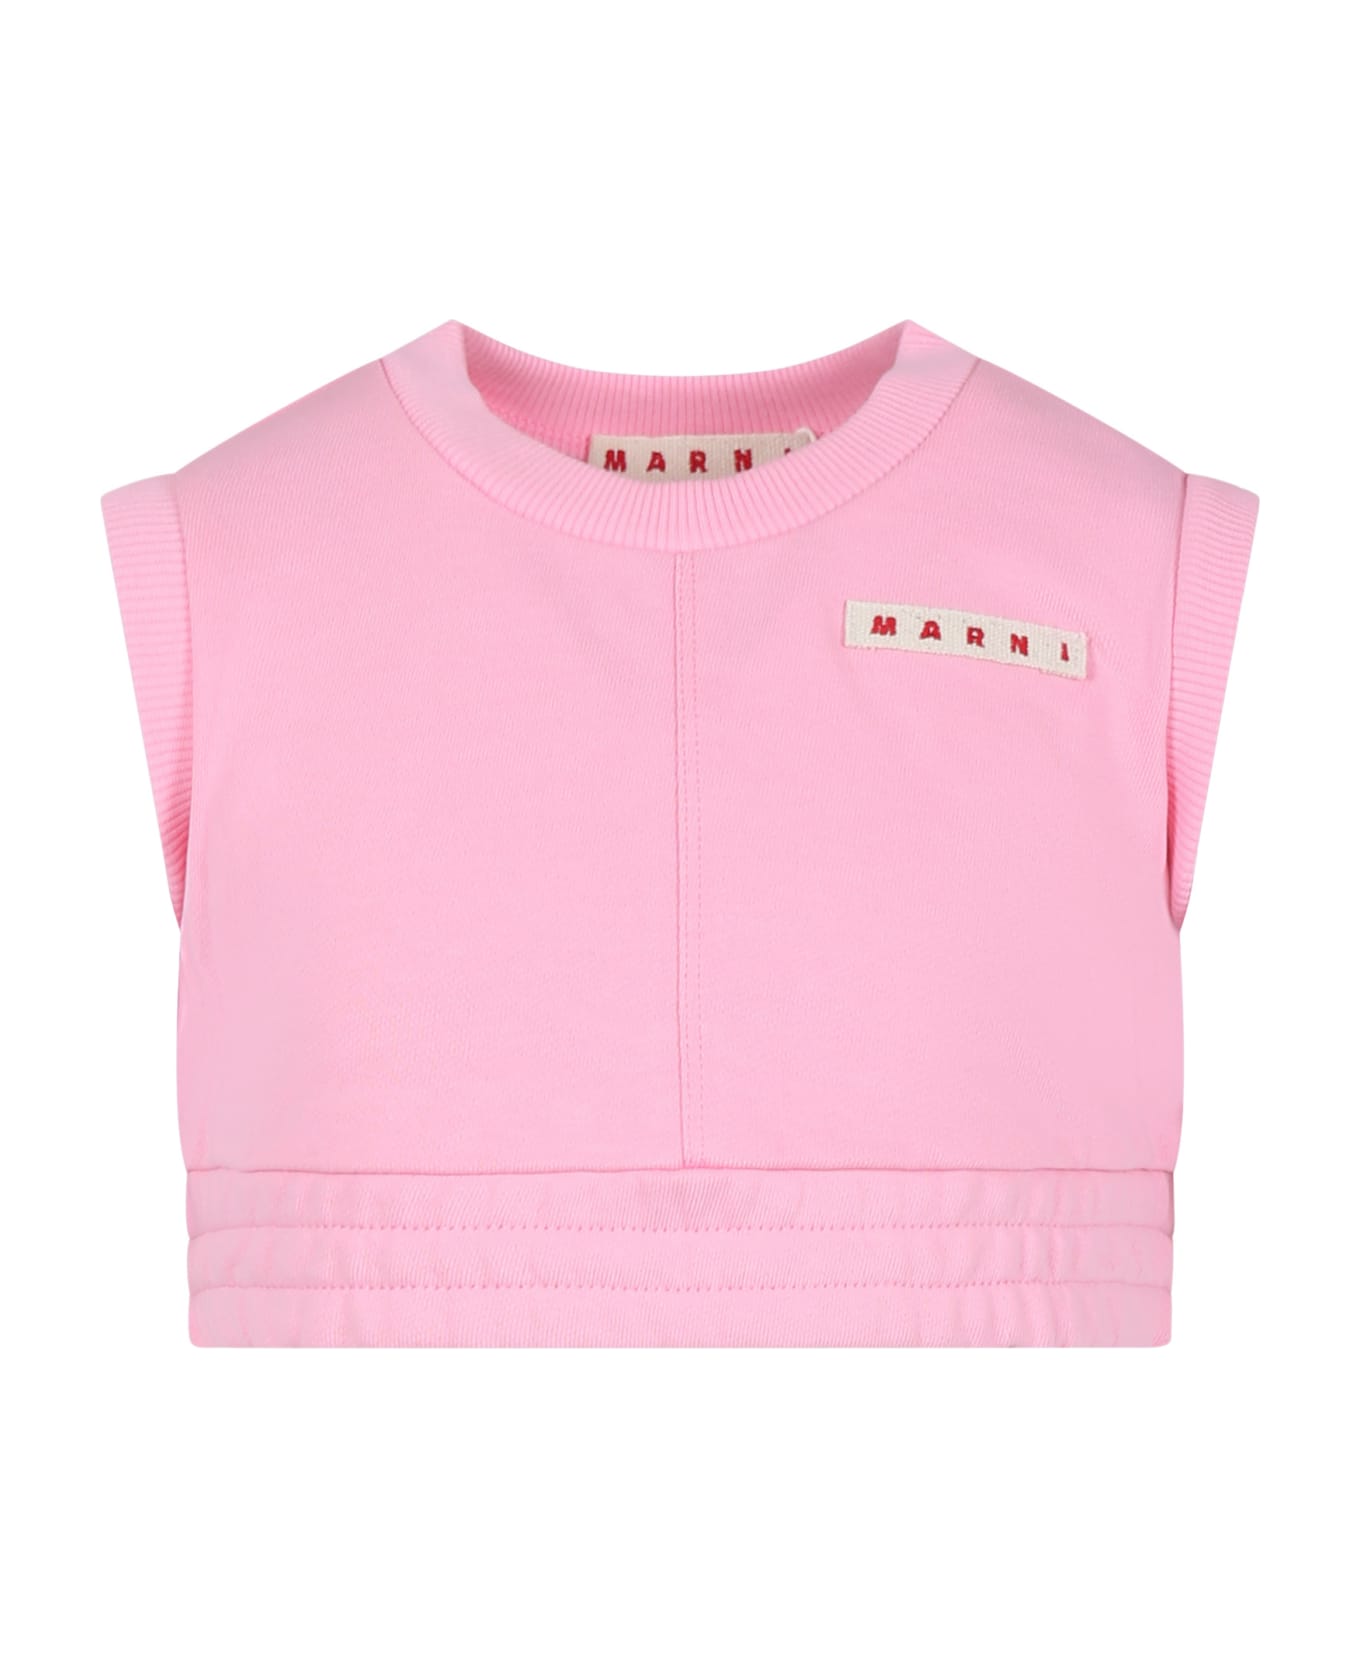 Marni Pink Top Gor Girl With Logo - Pink トップス